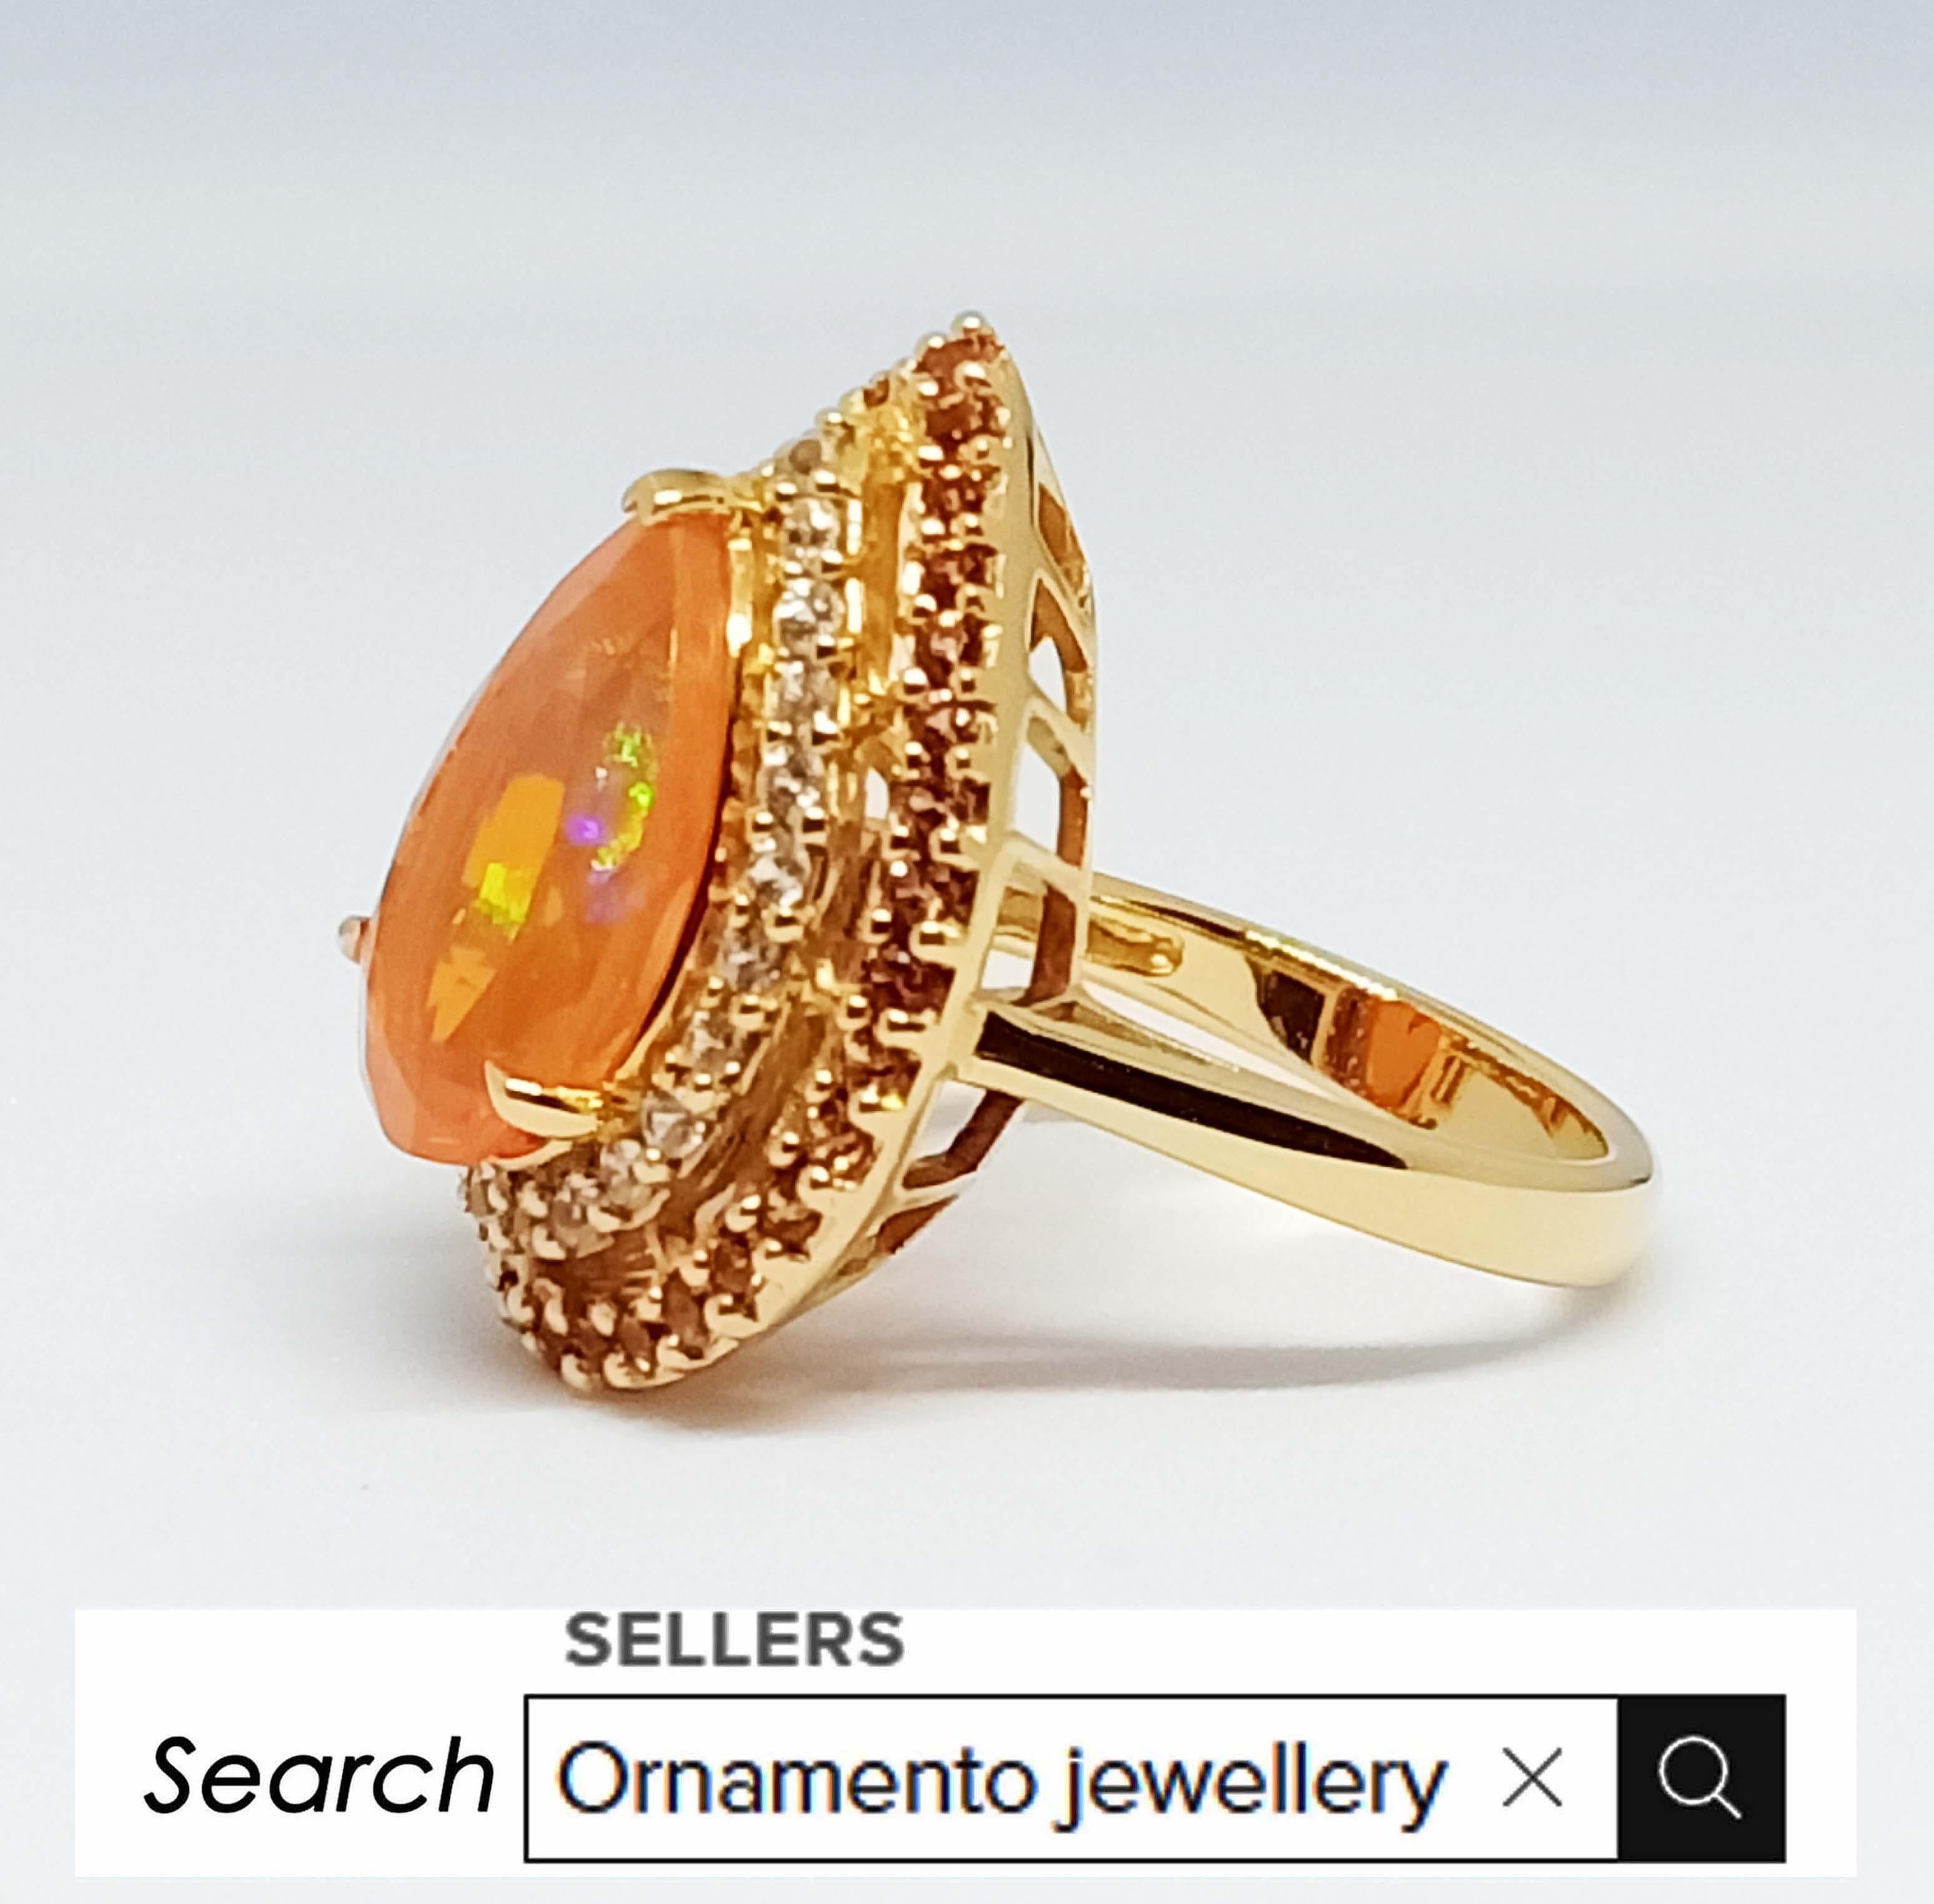 Contemporary 7.86cts. Orange Opal Ring. Sterling Silver 18k gold Plated. For Sale